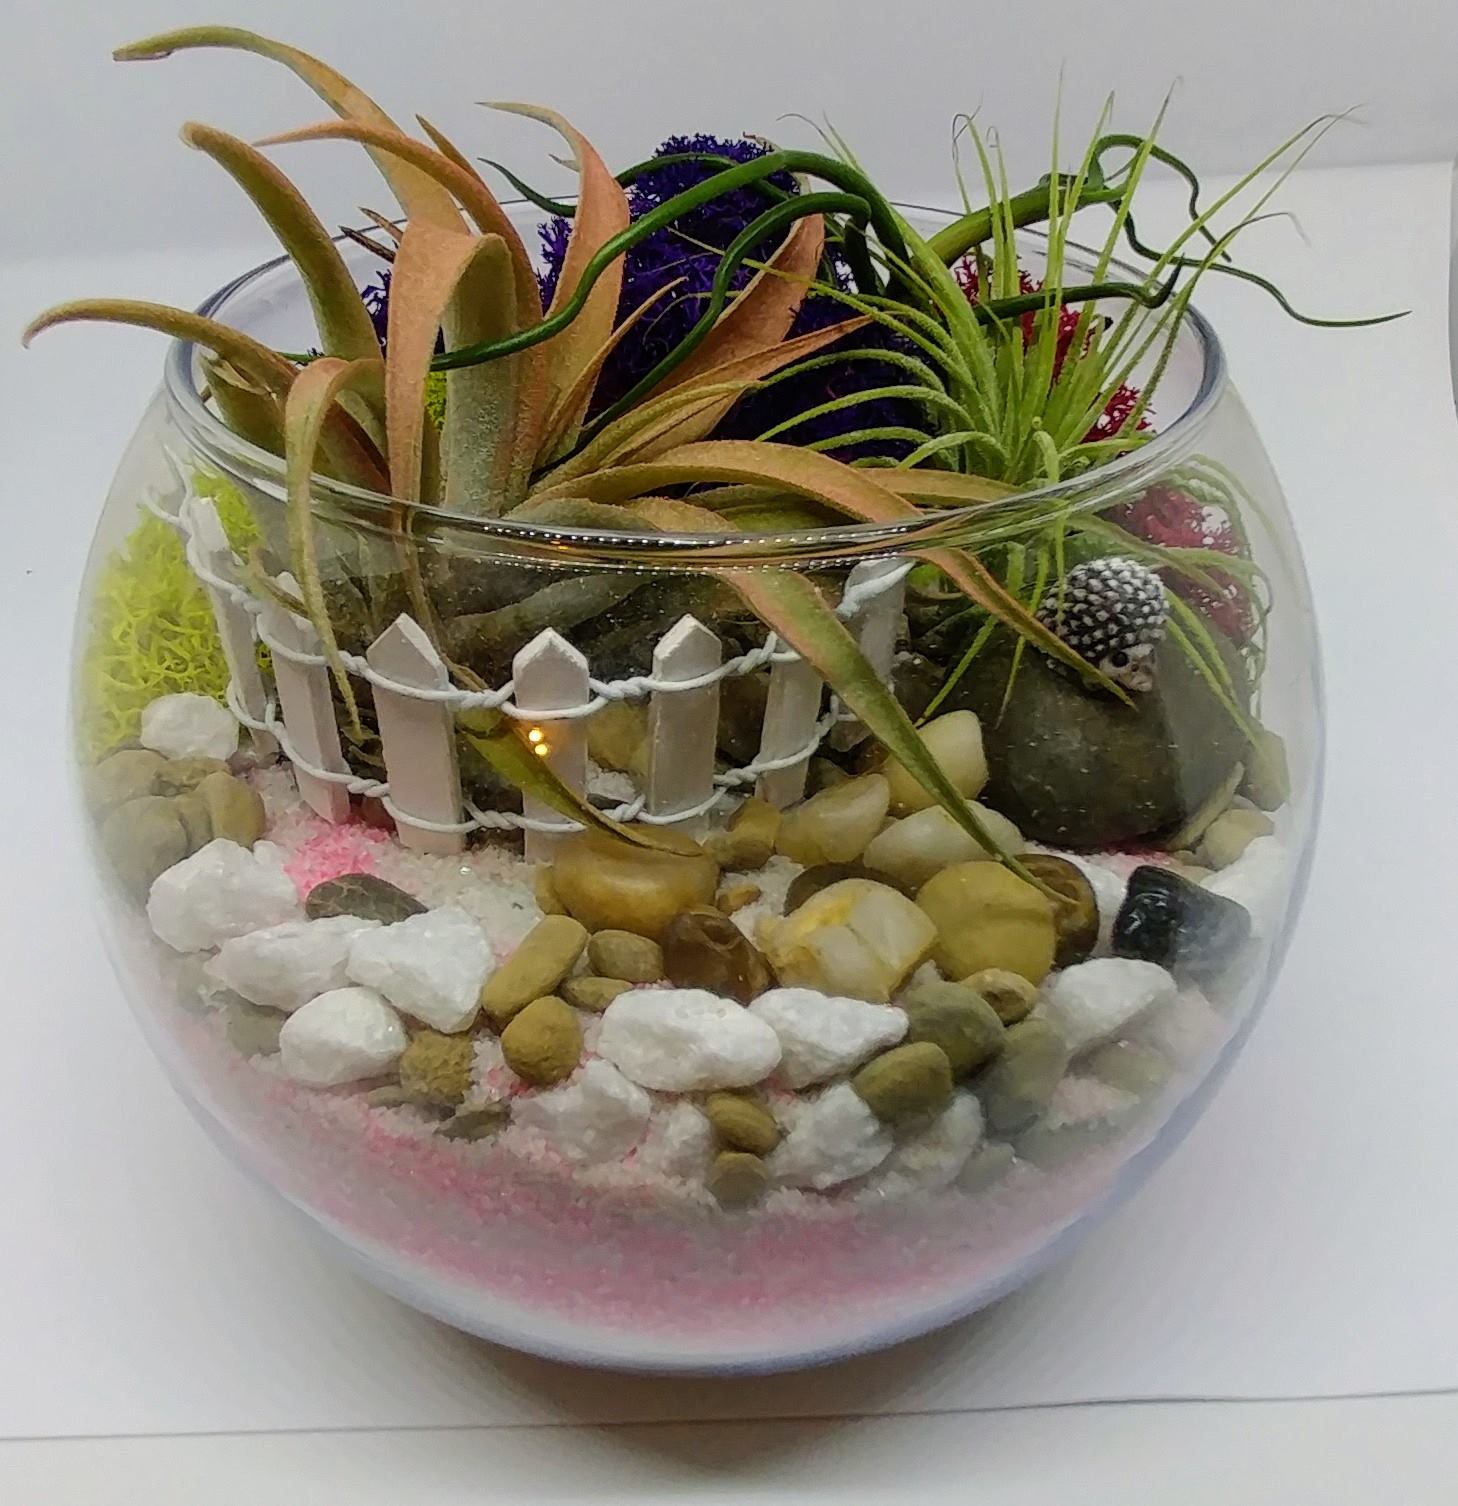 A Cute Hedgehog Sand Art with Air Plants plant nite project by Yaymaker